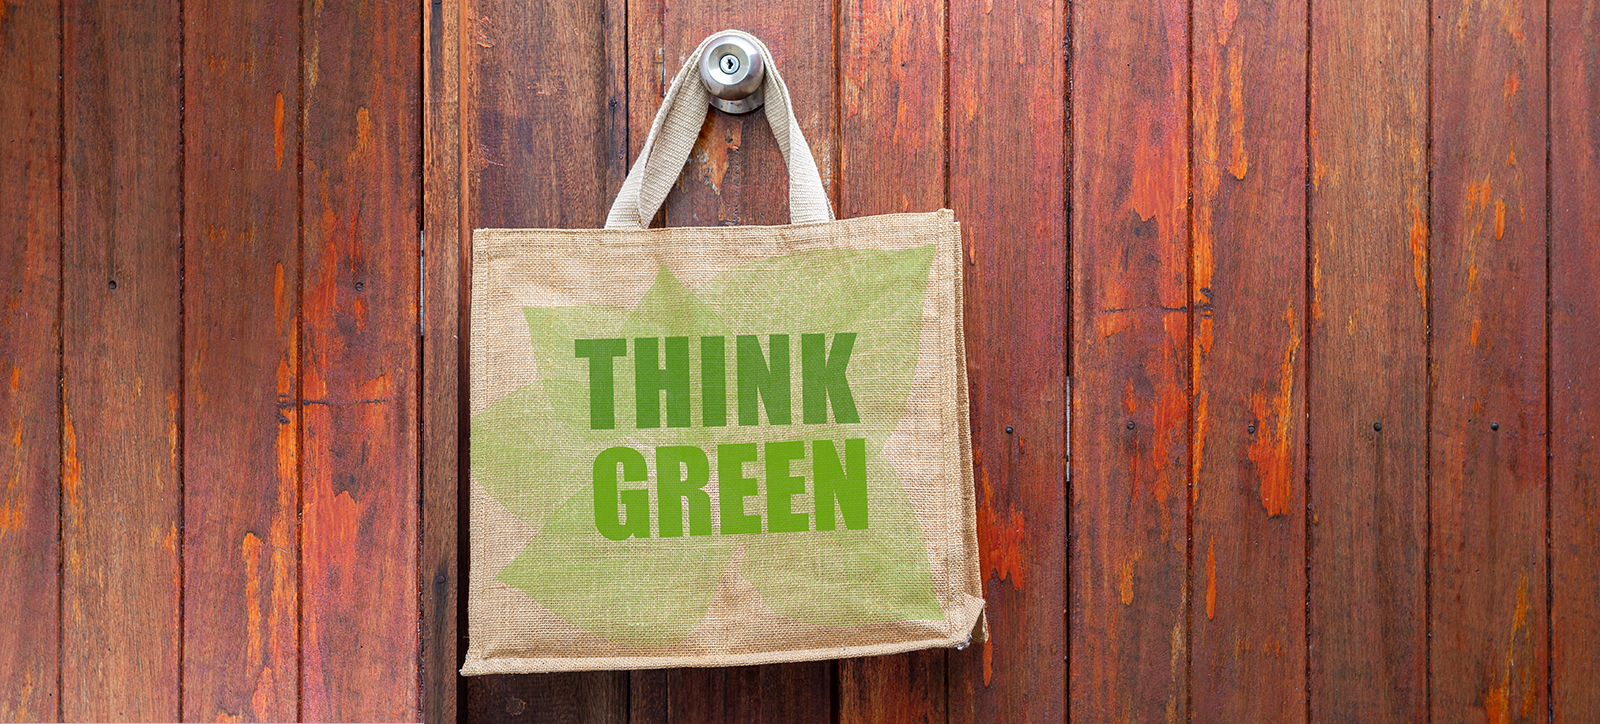 A bag with Think Green written on it